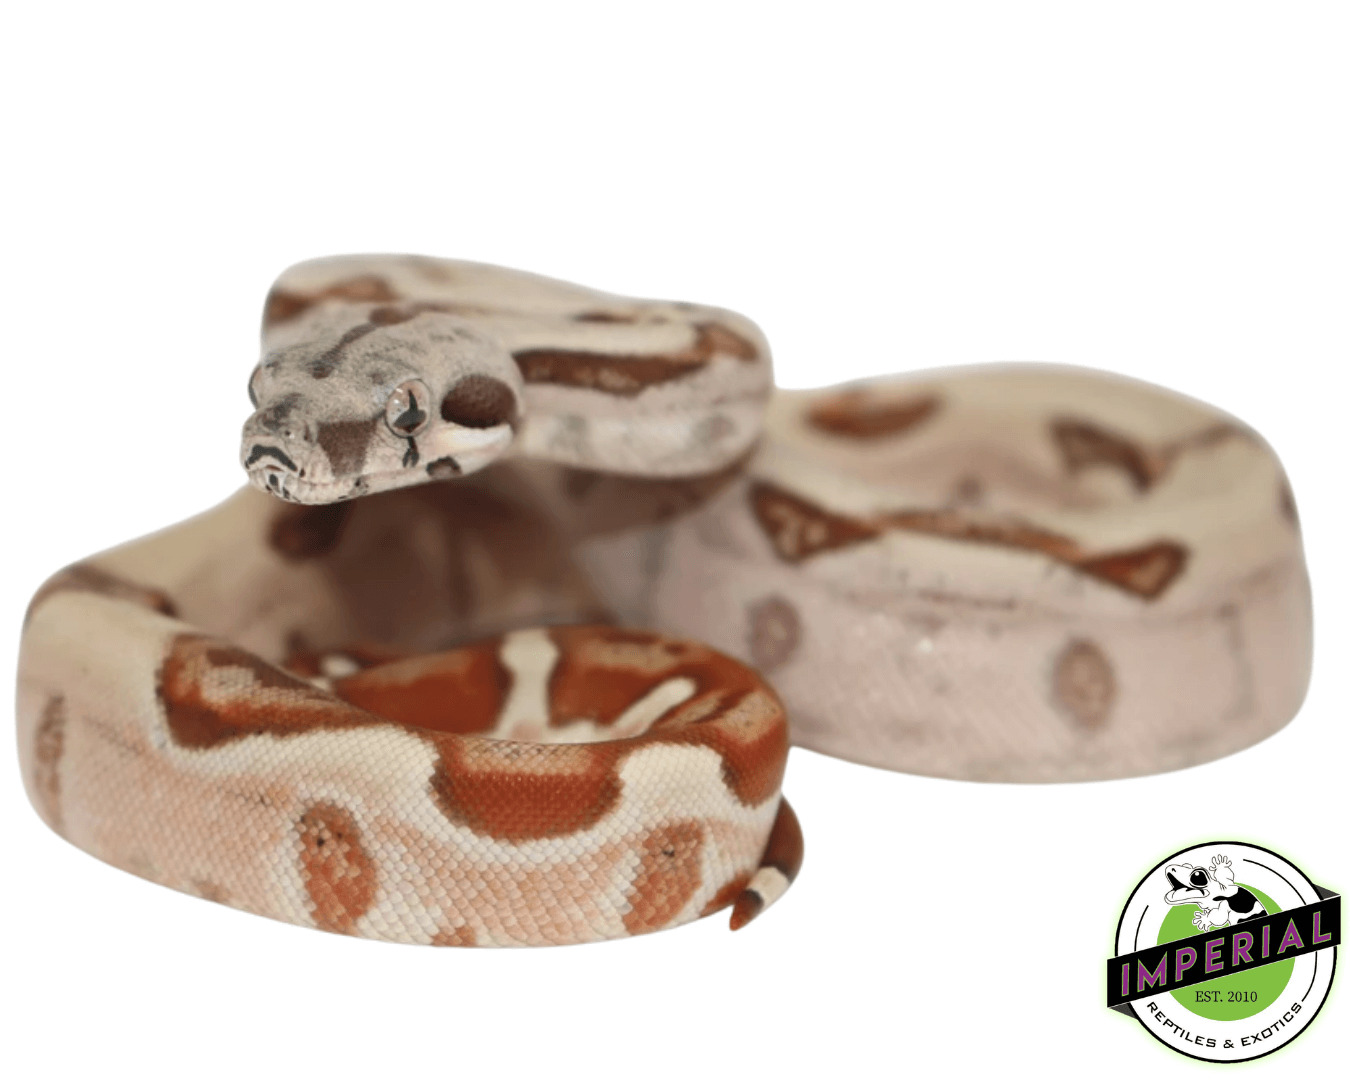 hypo colombian boa constrictor for sale, buy reptiles online